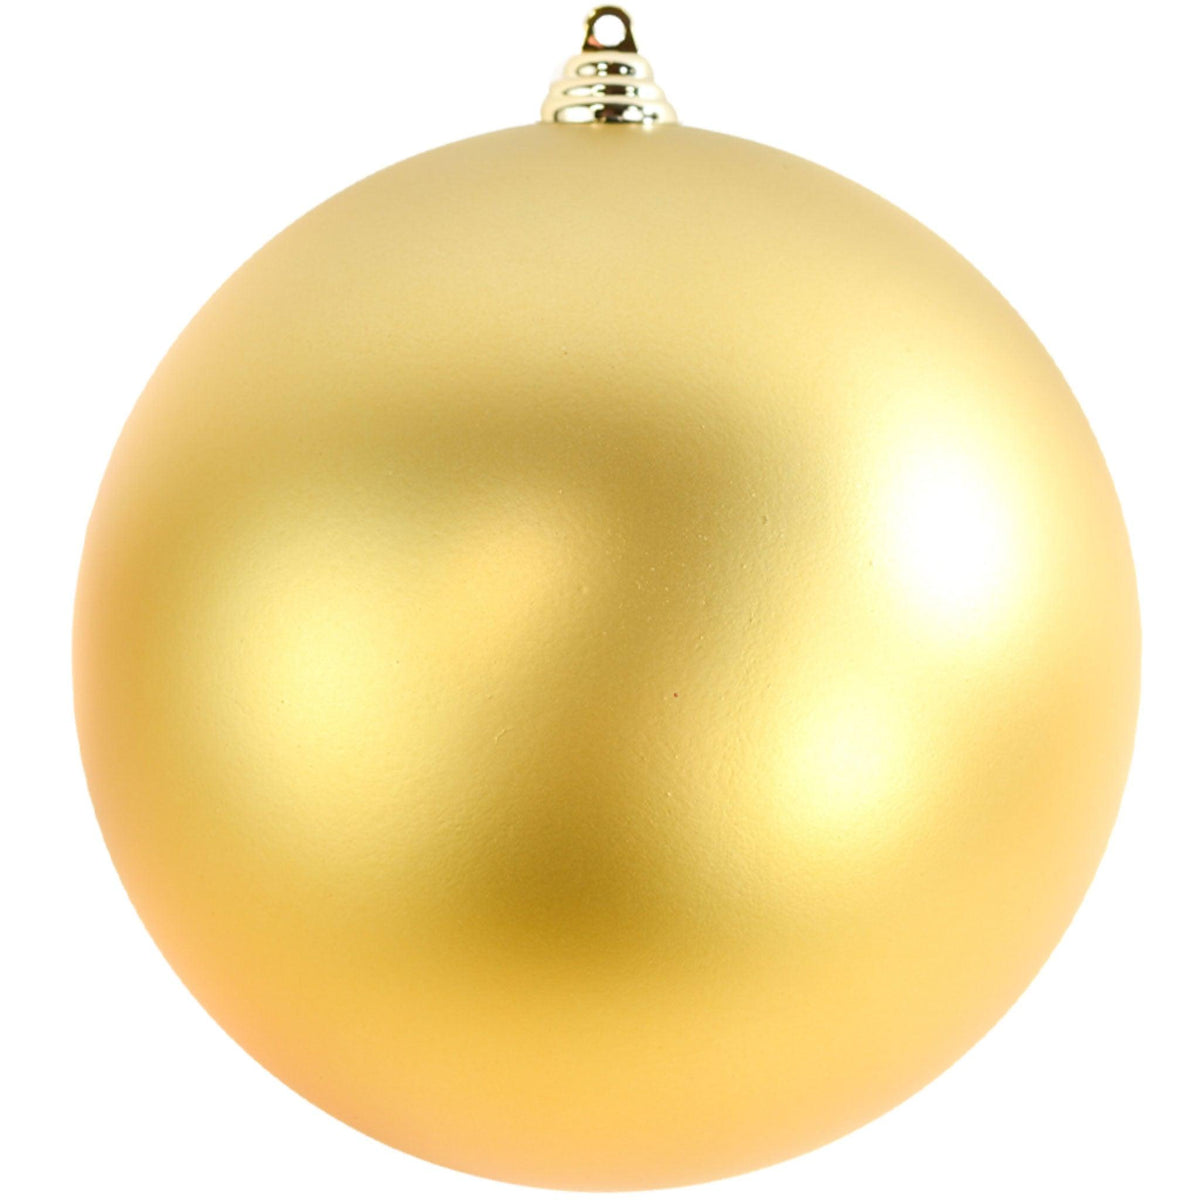 Lee Display offers brand new Shiny Matte Gold Plastic Ball Ornaments at wholesale prices for affordable Christmas Tree Hanging and Holiday Decorating on sale at leedisplay.com